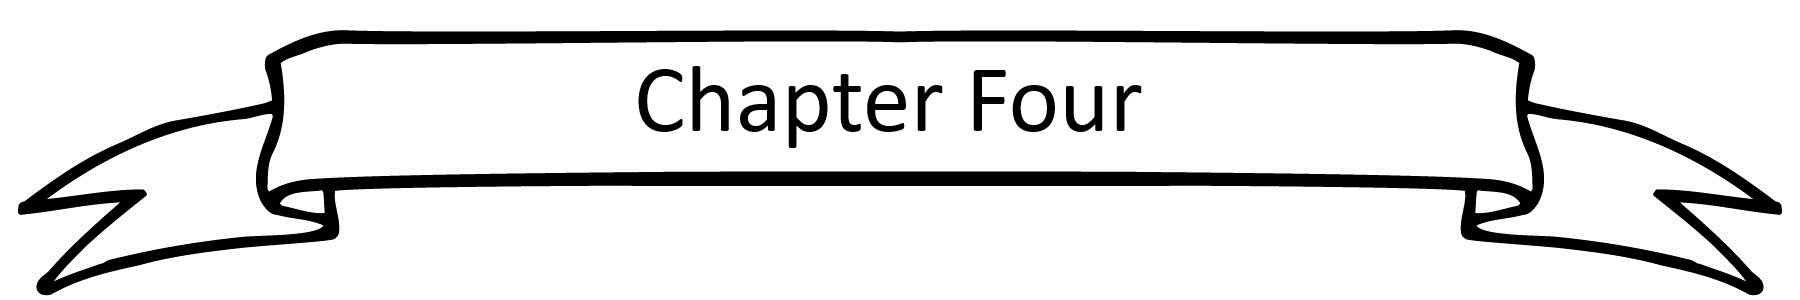 chapter four heading